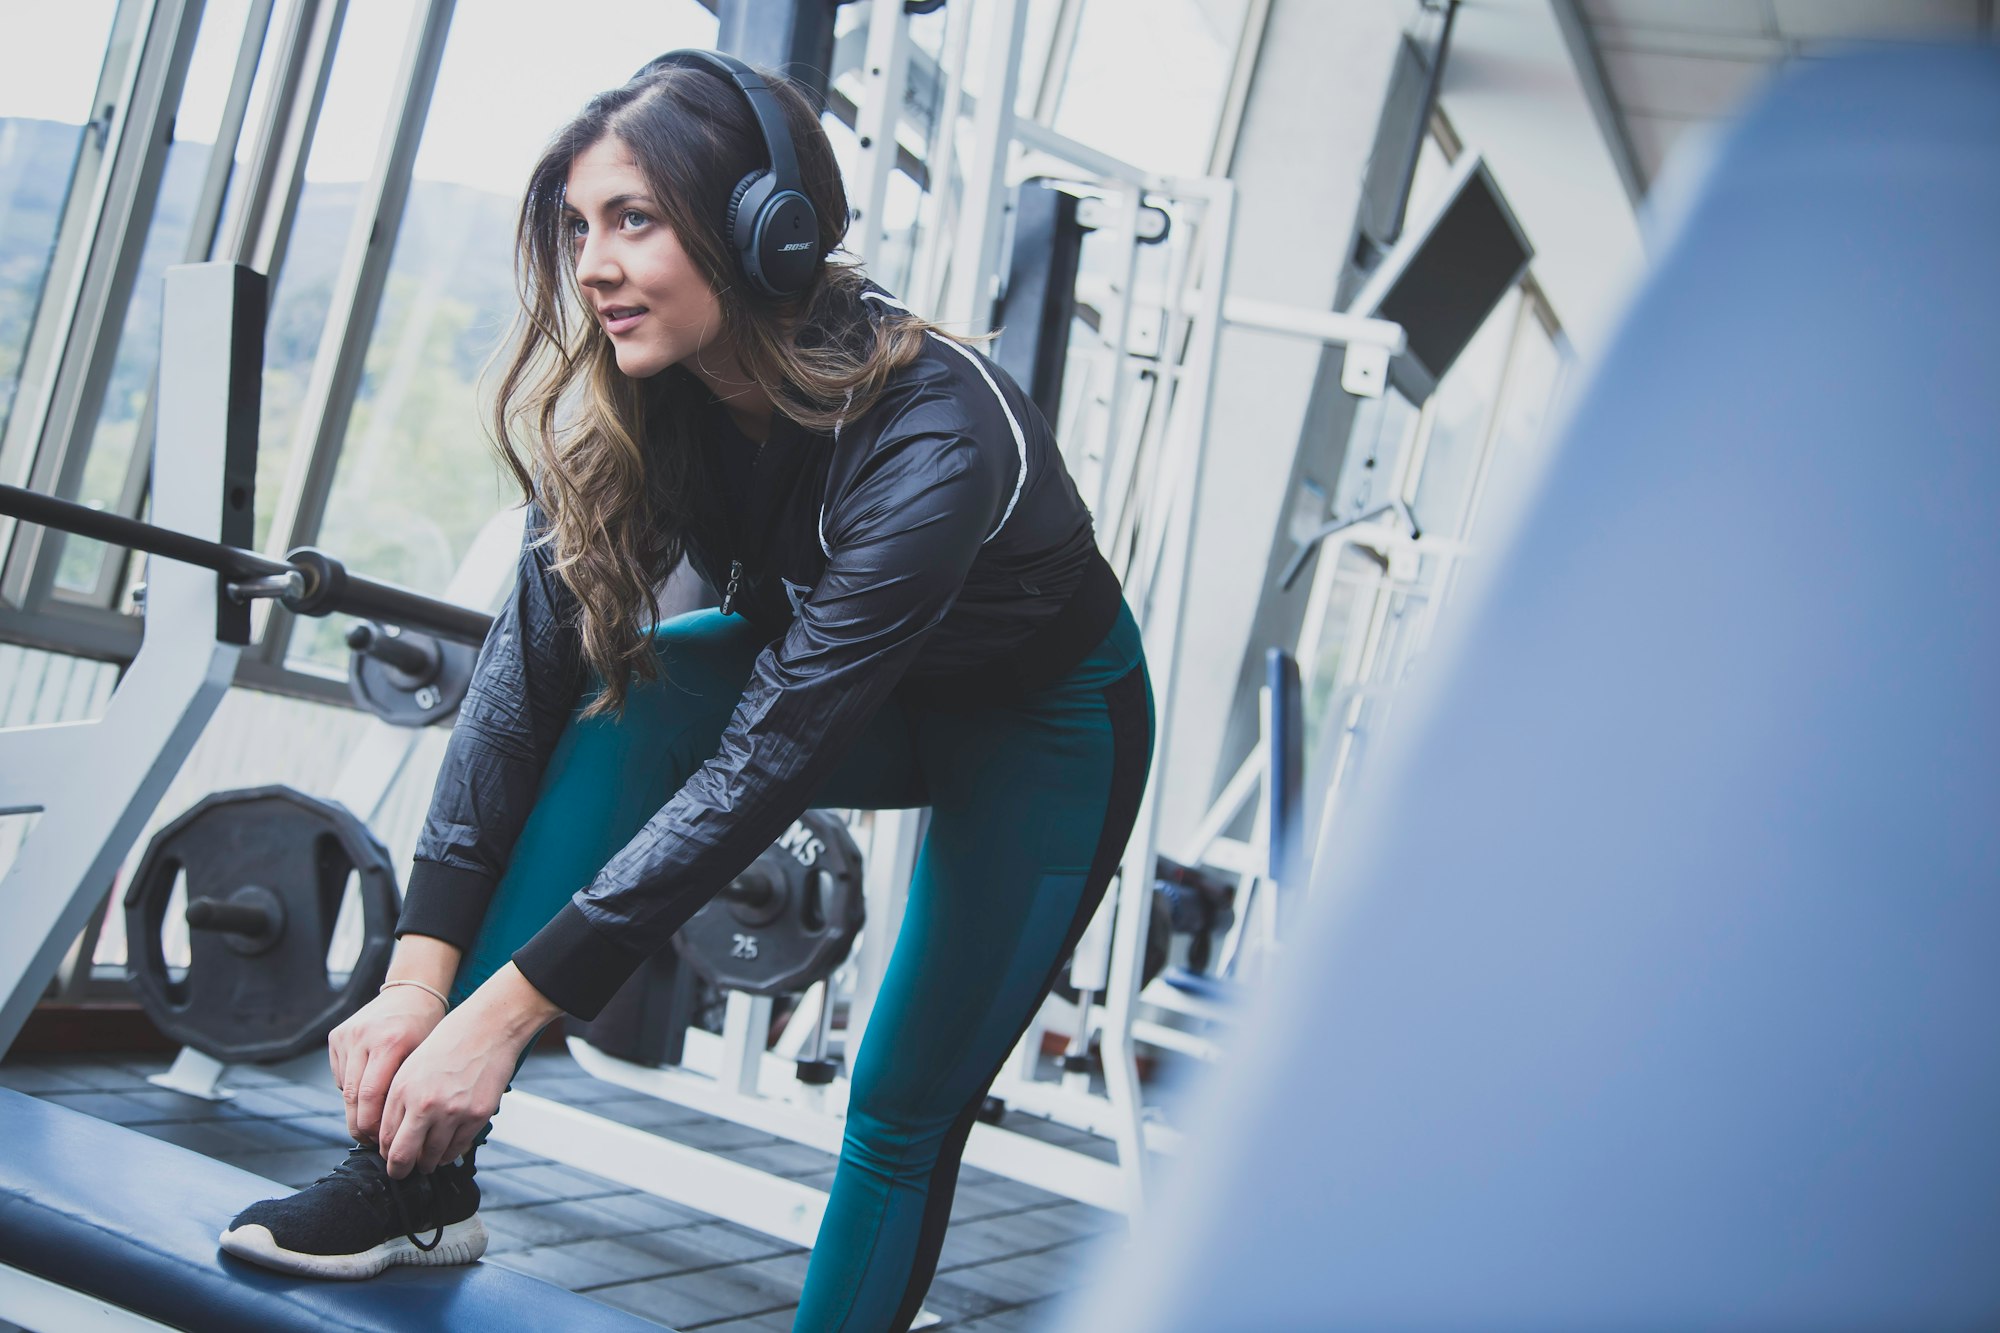 An image of a woman working out while listening to music headphones 